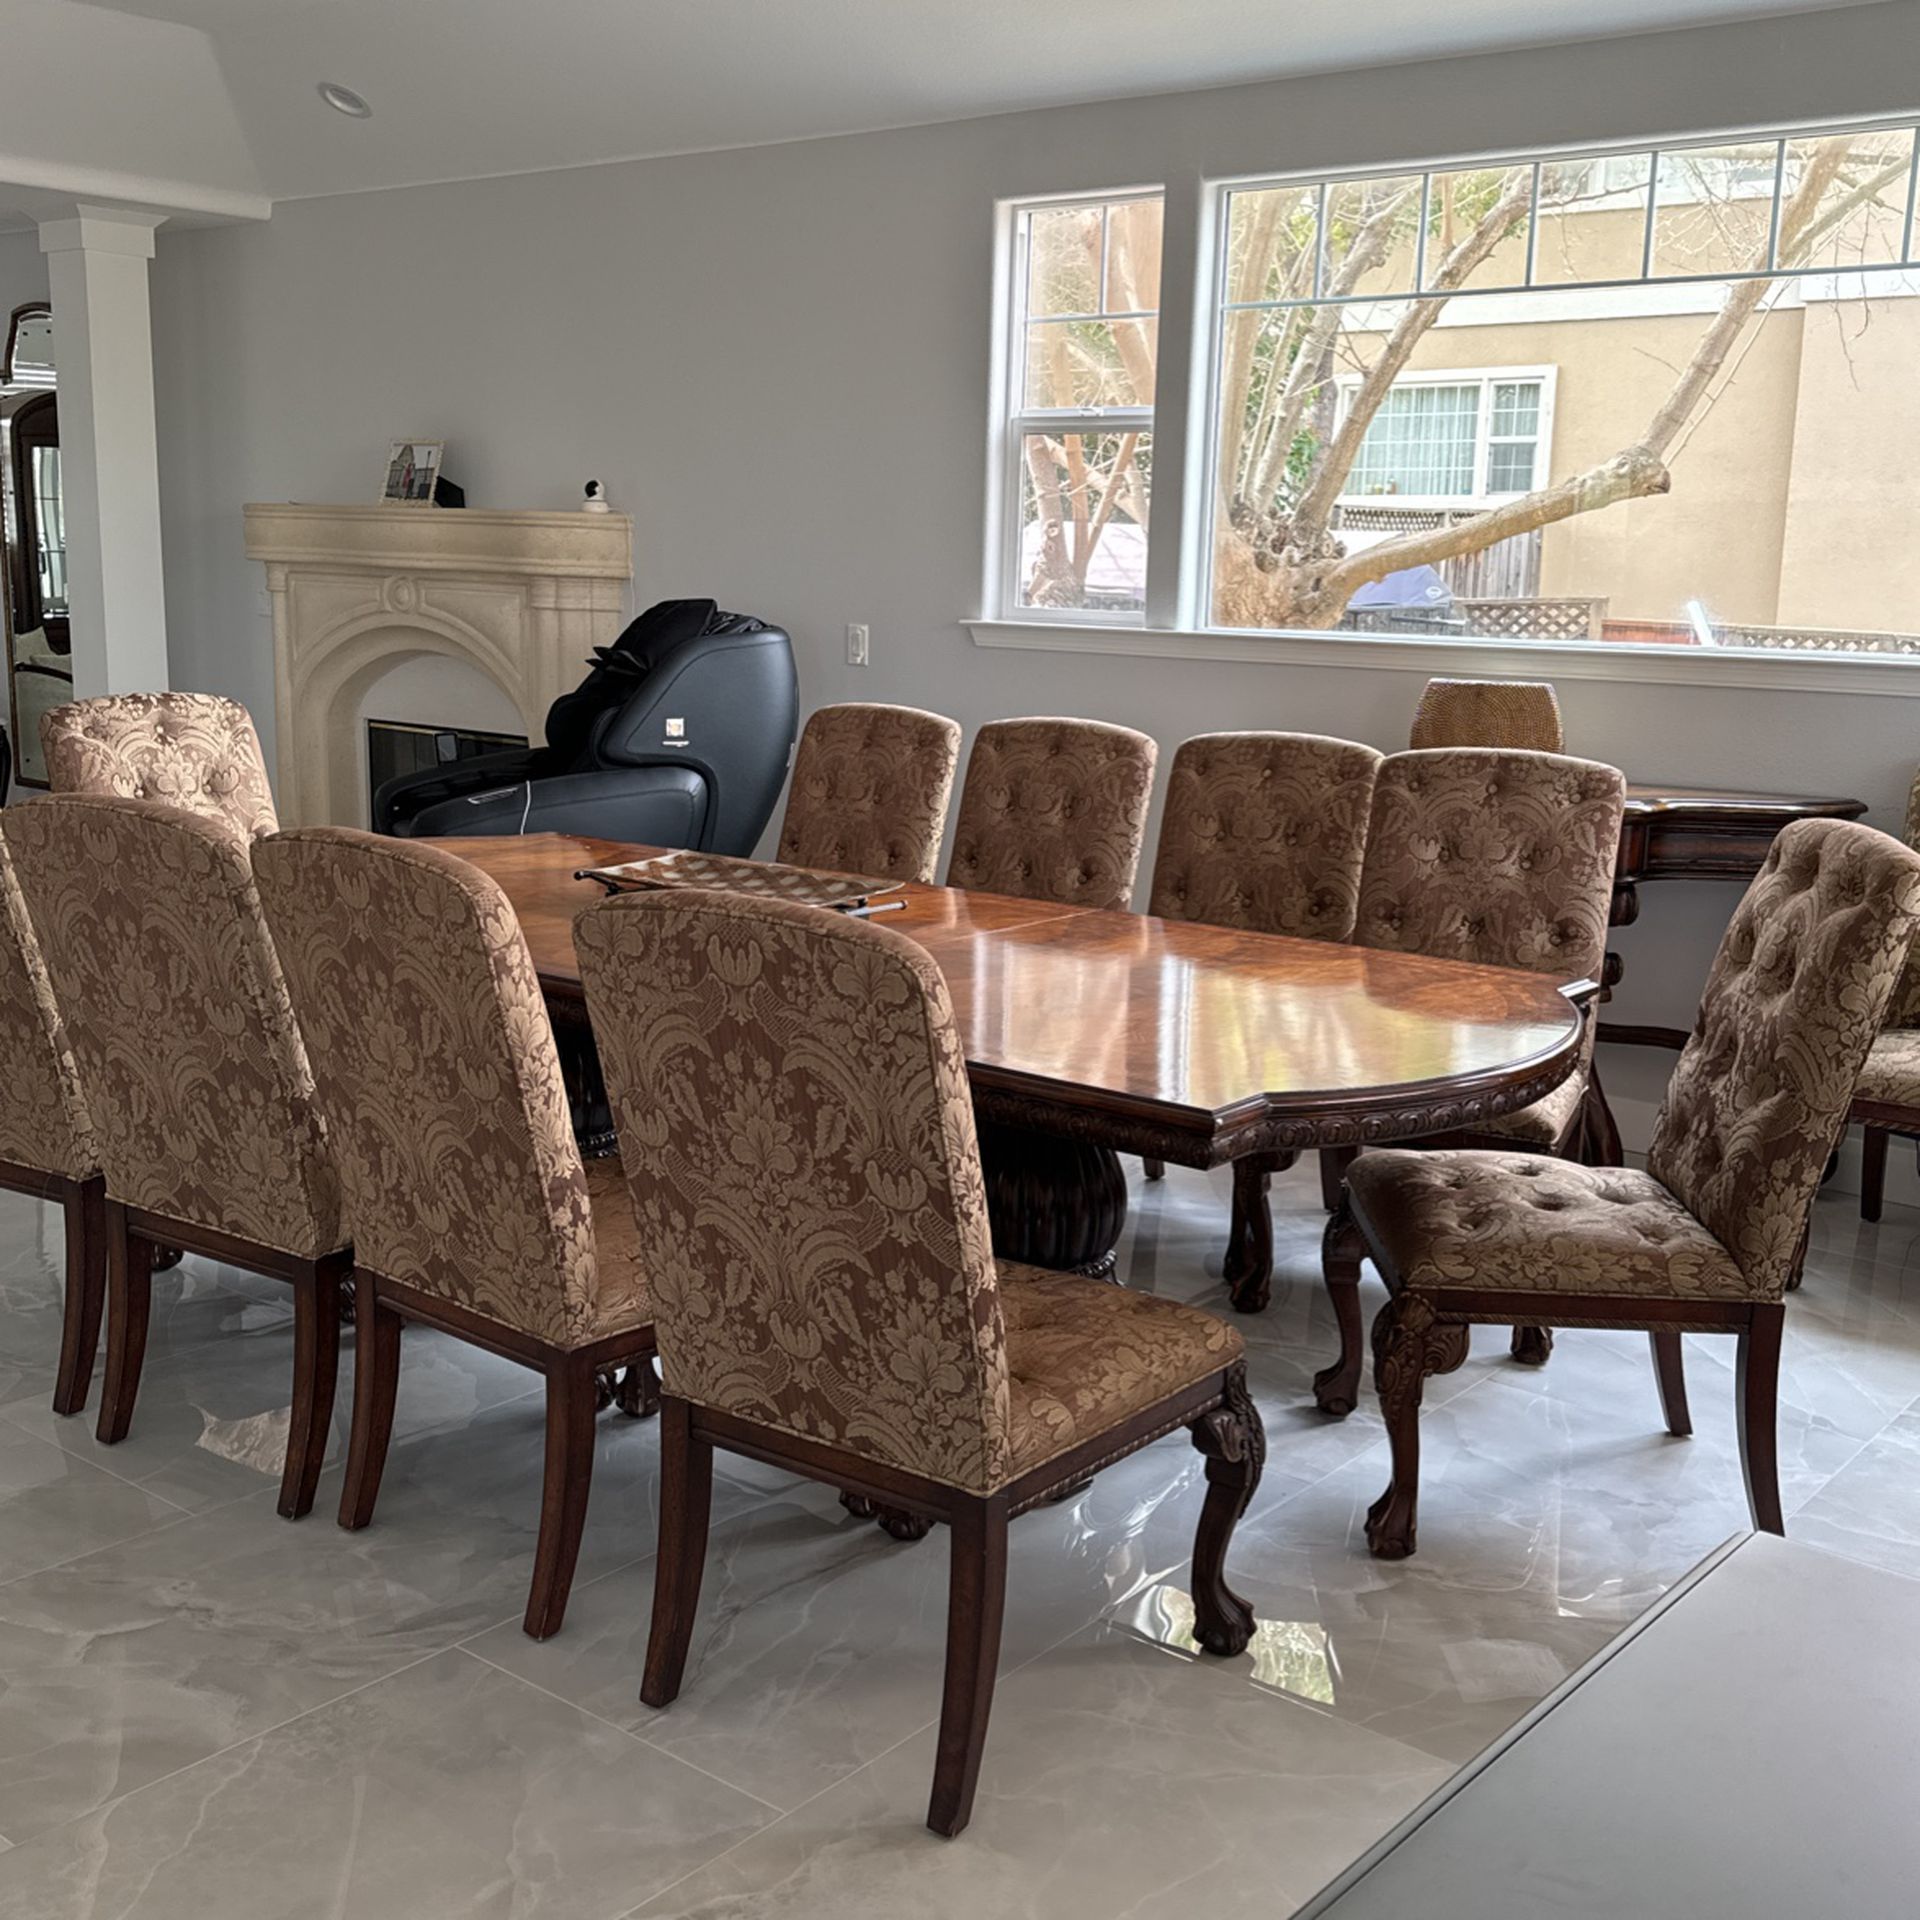 Dining Table With12 Chairs  10 Chair And 2 Arm Chair 